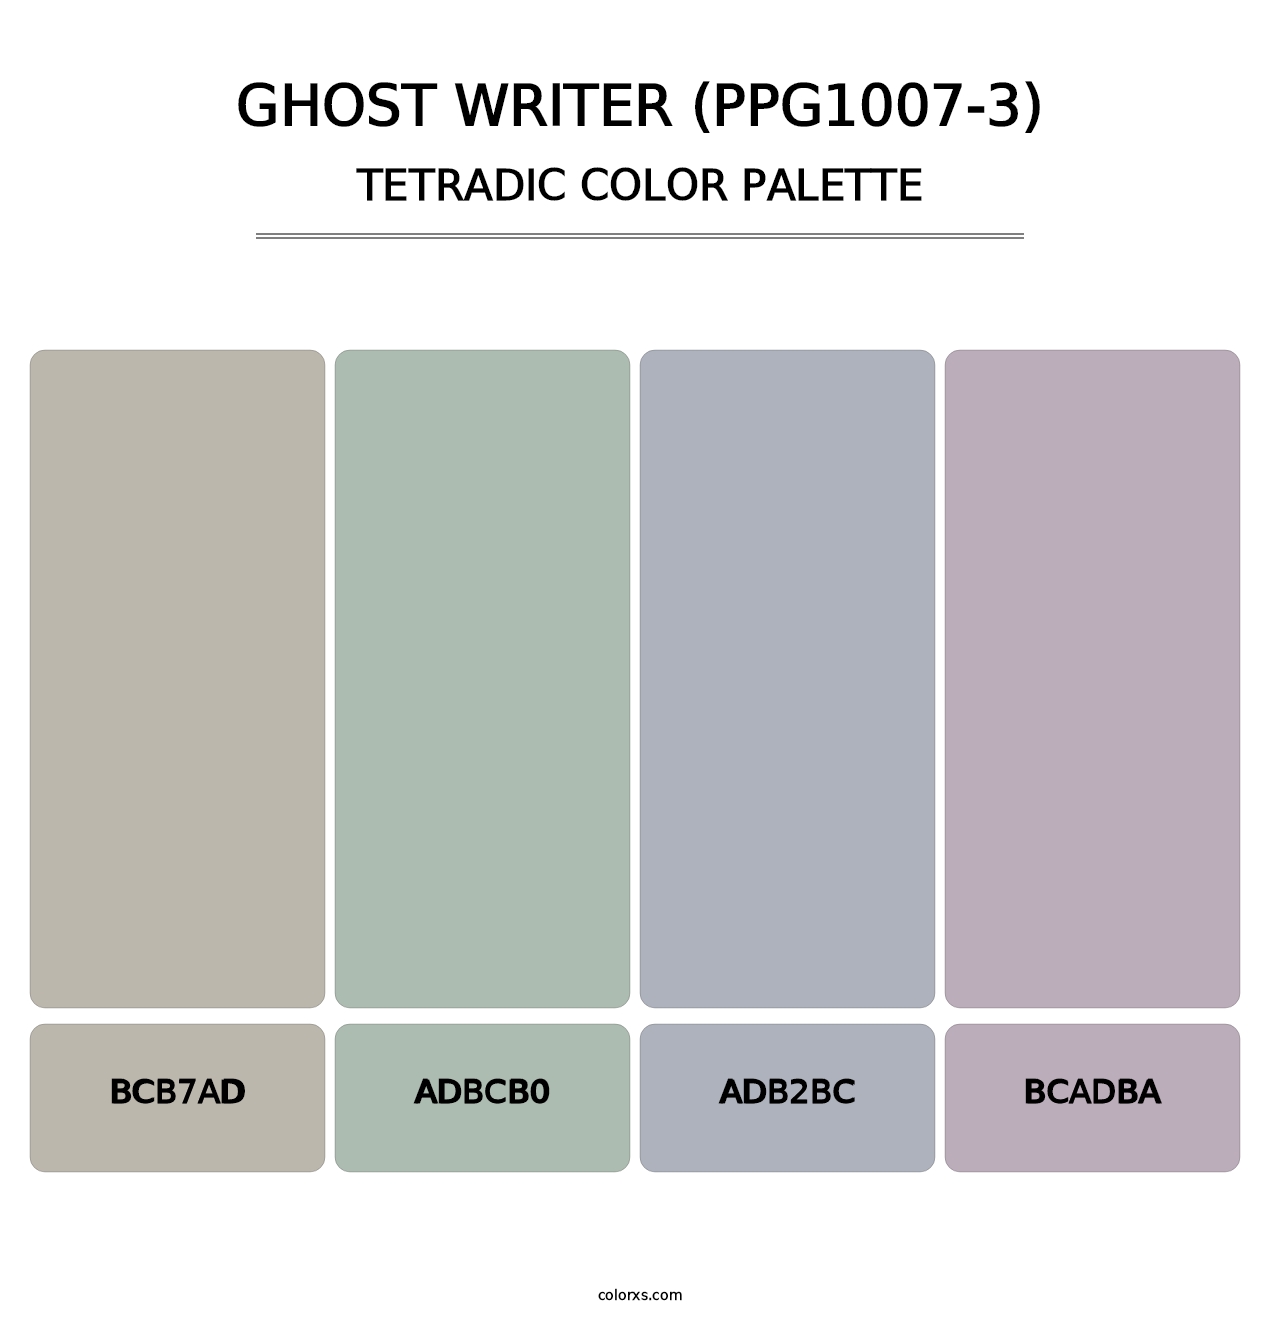 Ghost Writer (PPG1007-3) - Tetradic Color Palette